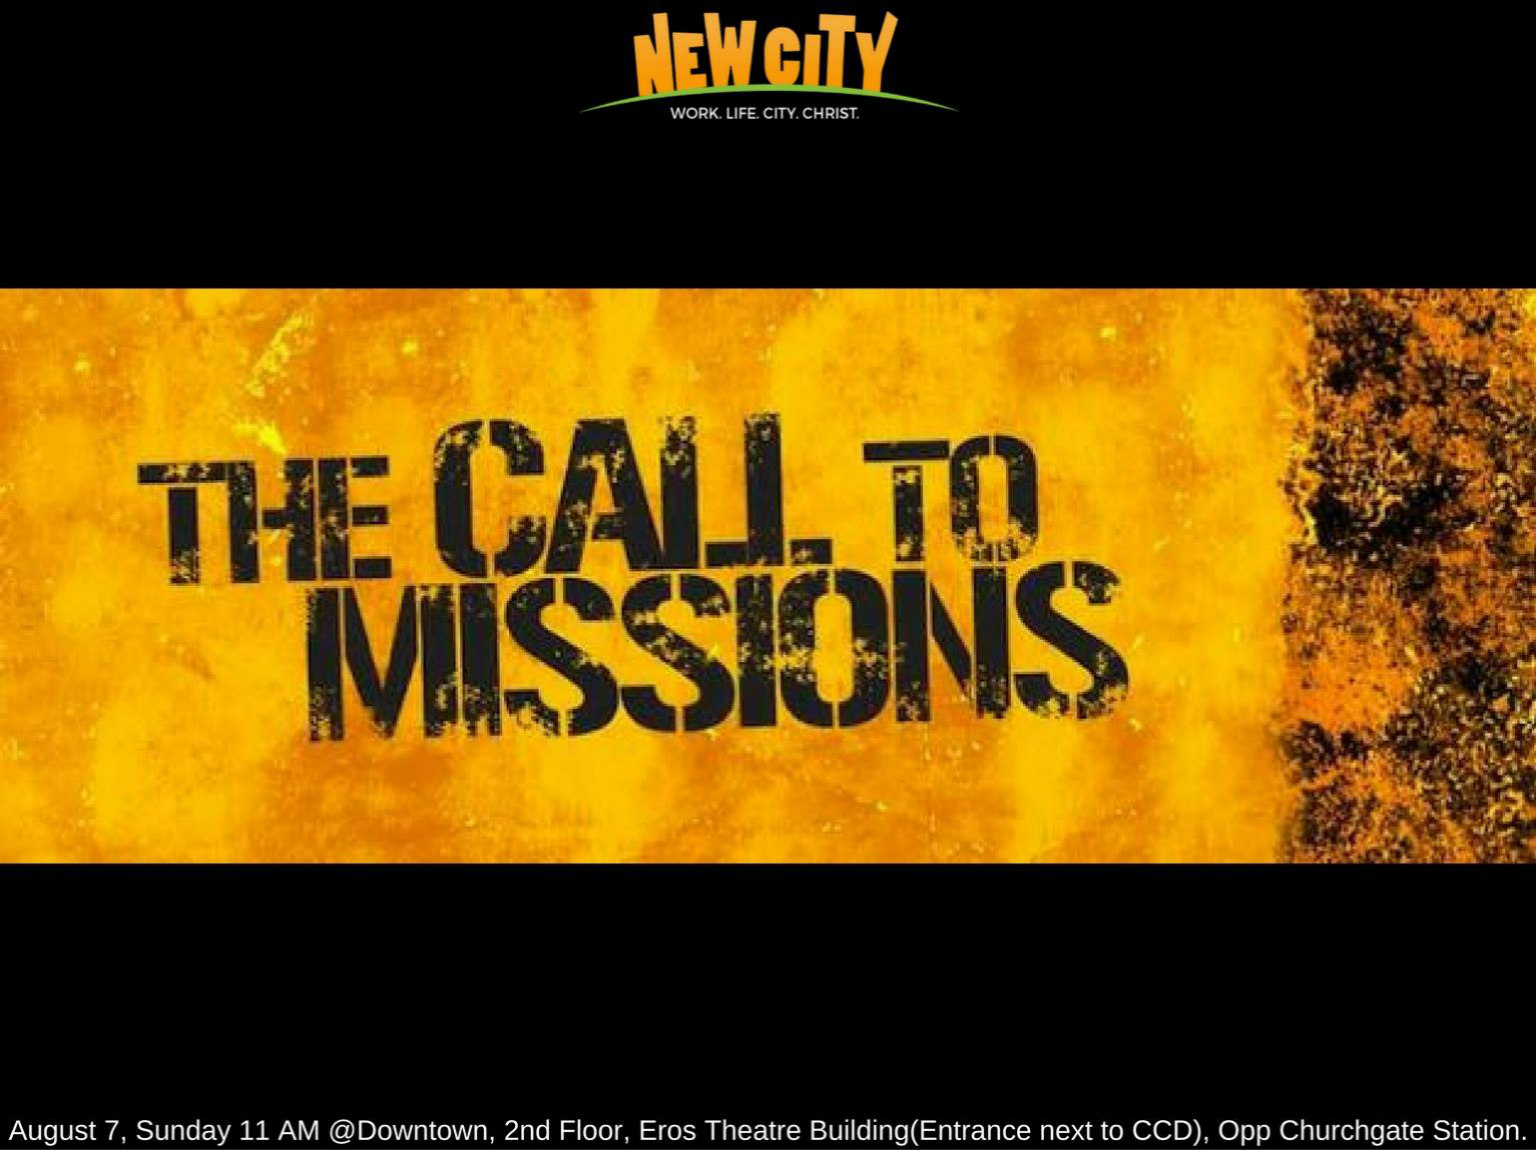 The Call to Mission Image